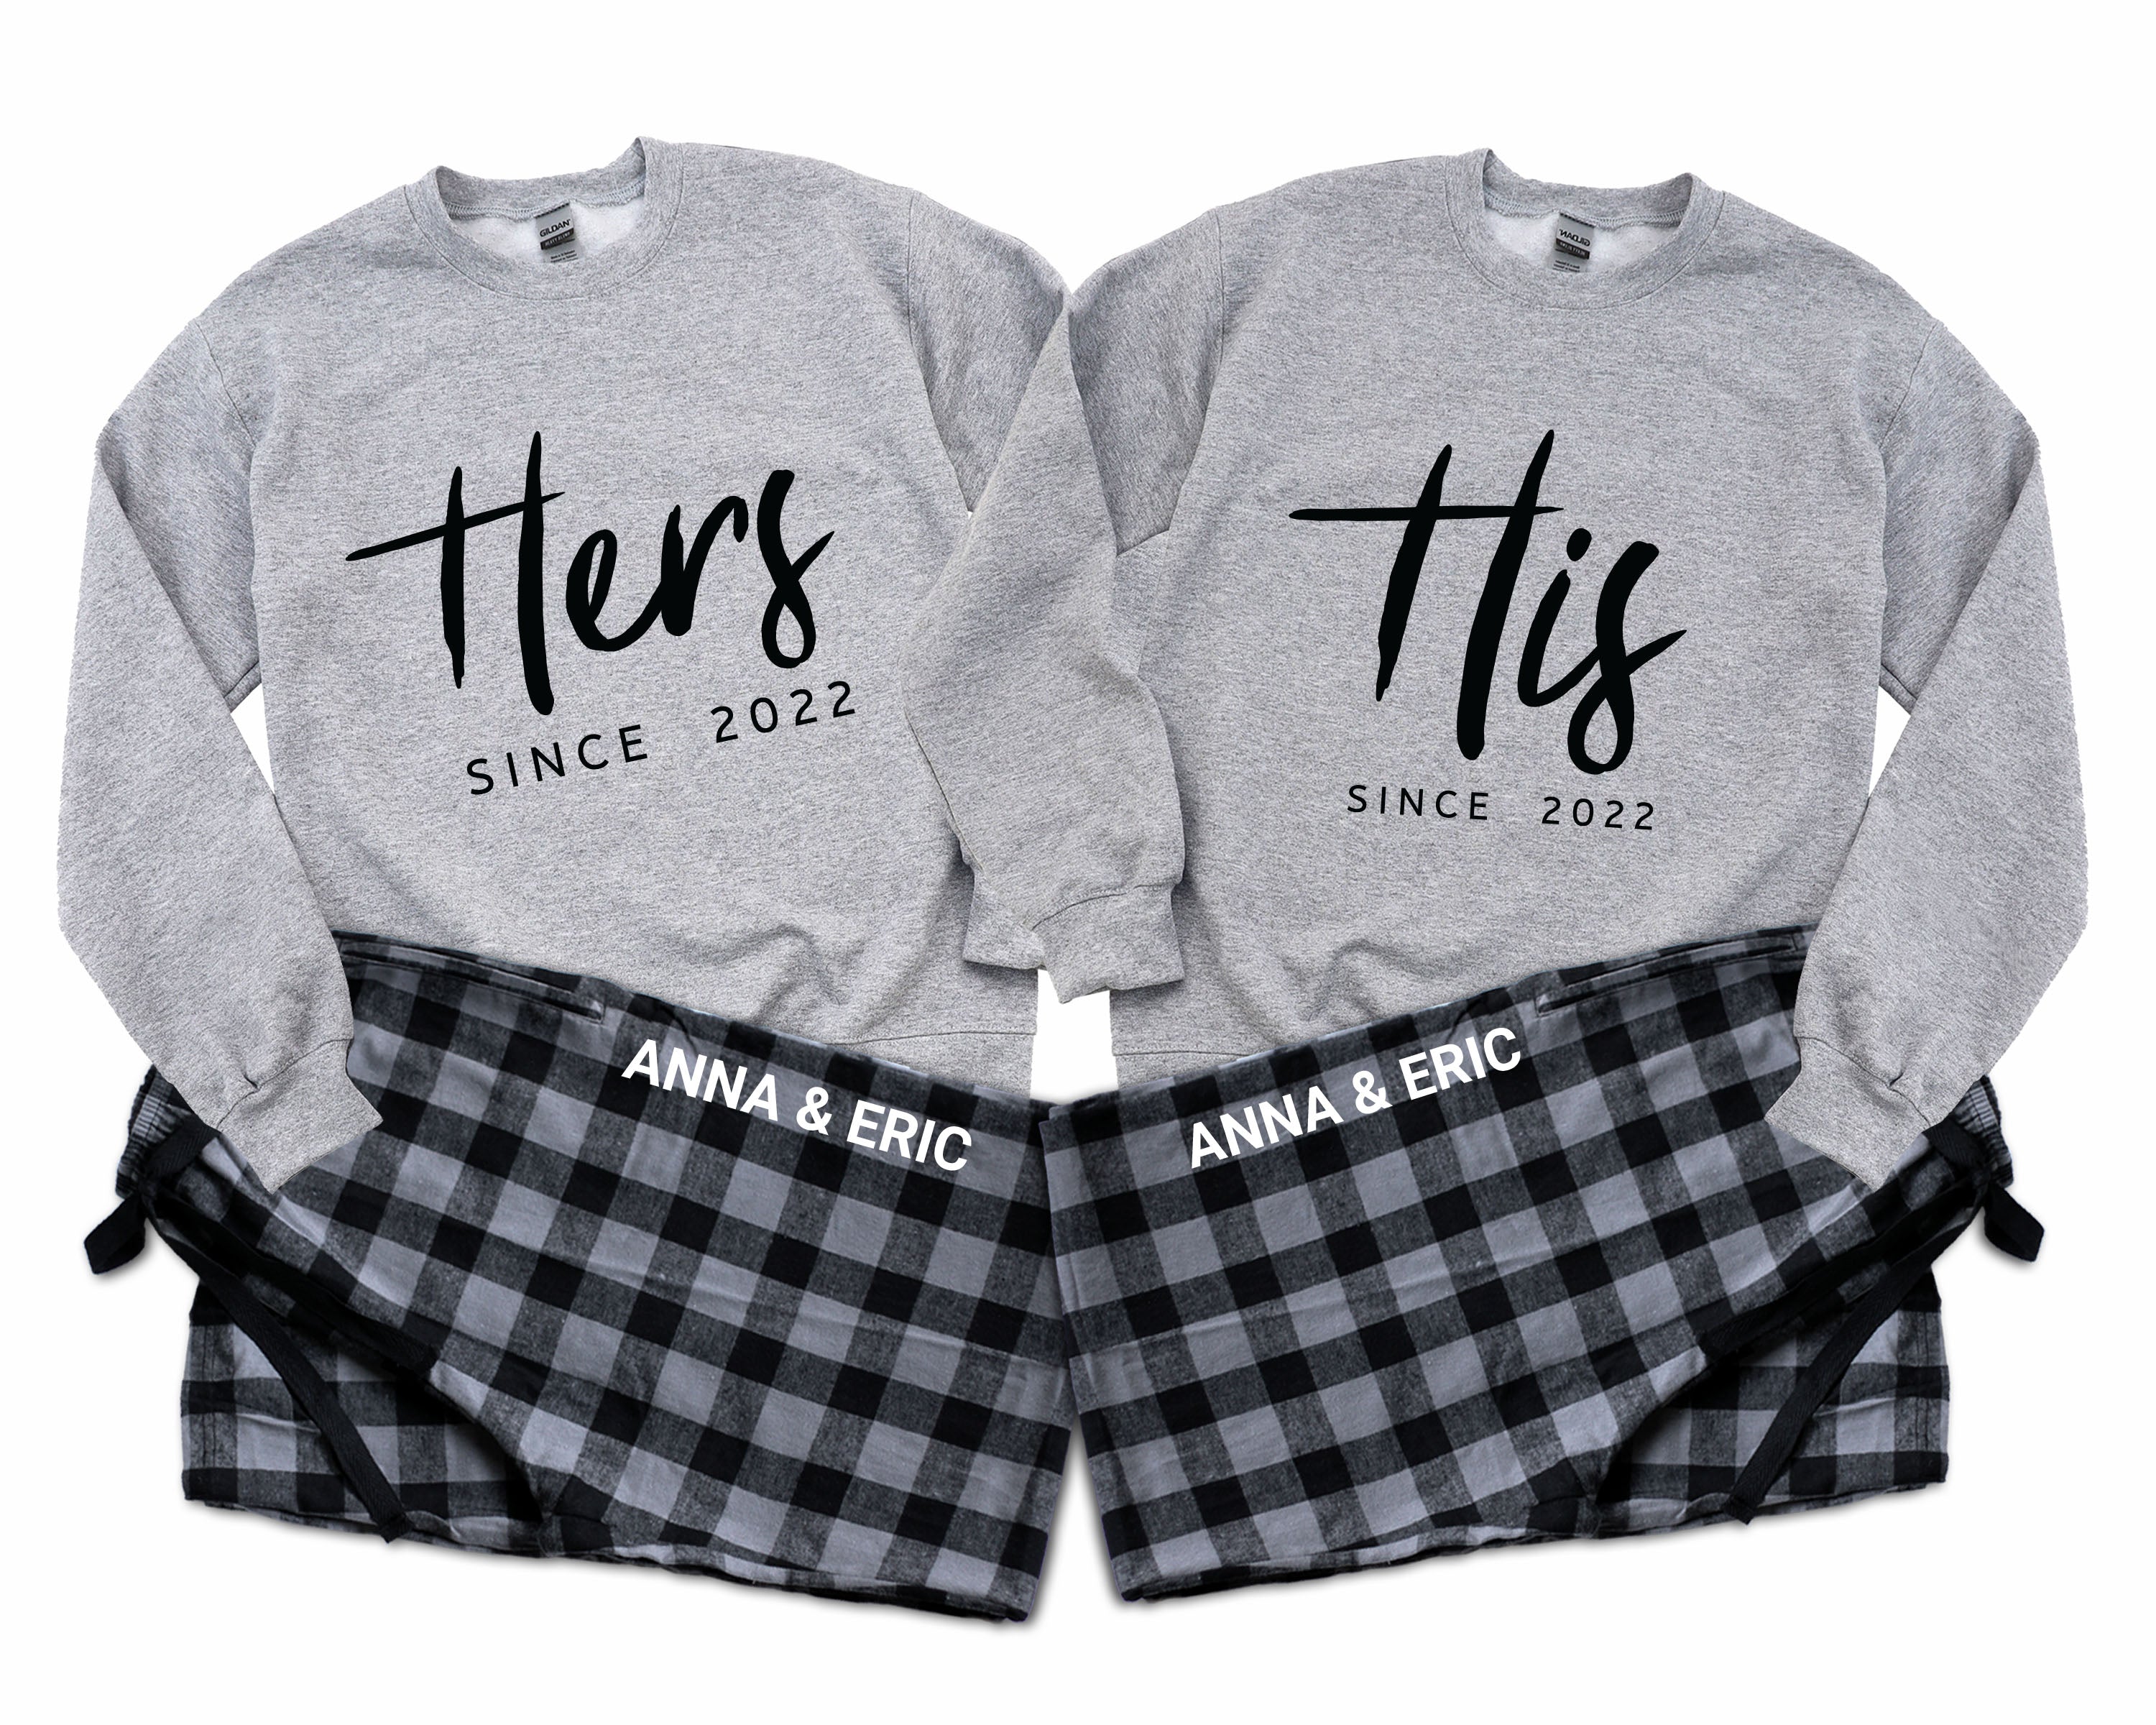 His & Hers - Personalized Couple Matching Pajamas, Valentines Day gift –